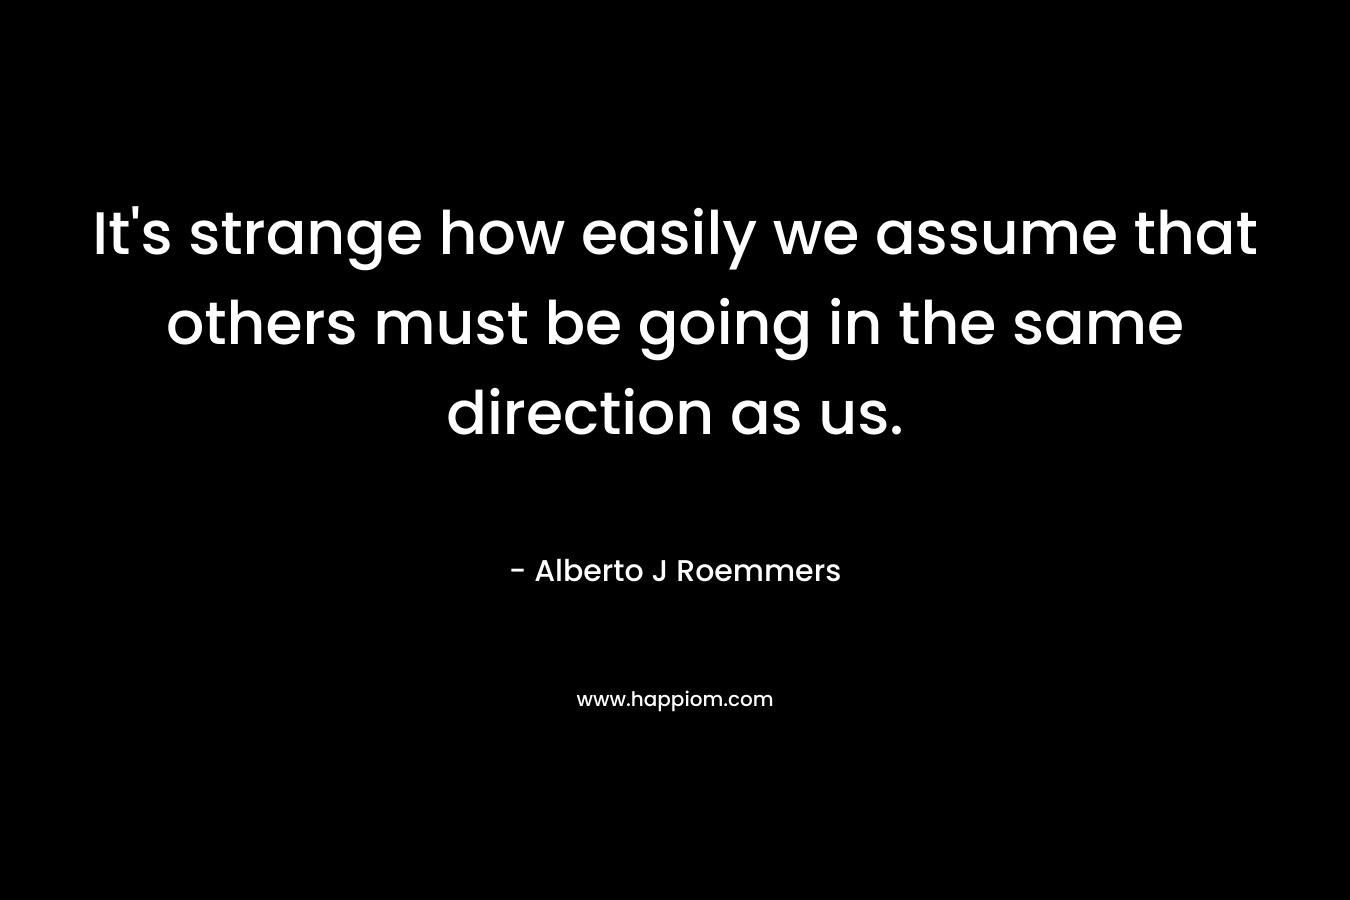 It’s strange how easily we assume that others must be going in the same direction as us. – Alberto J Roemmers